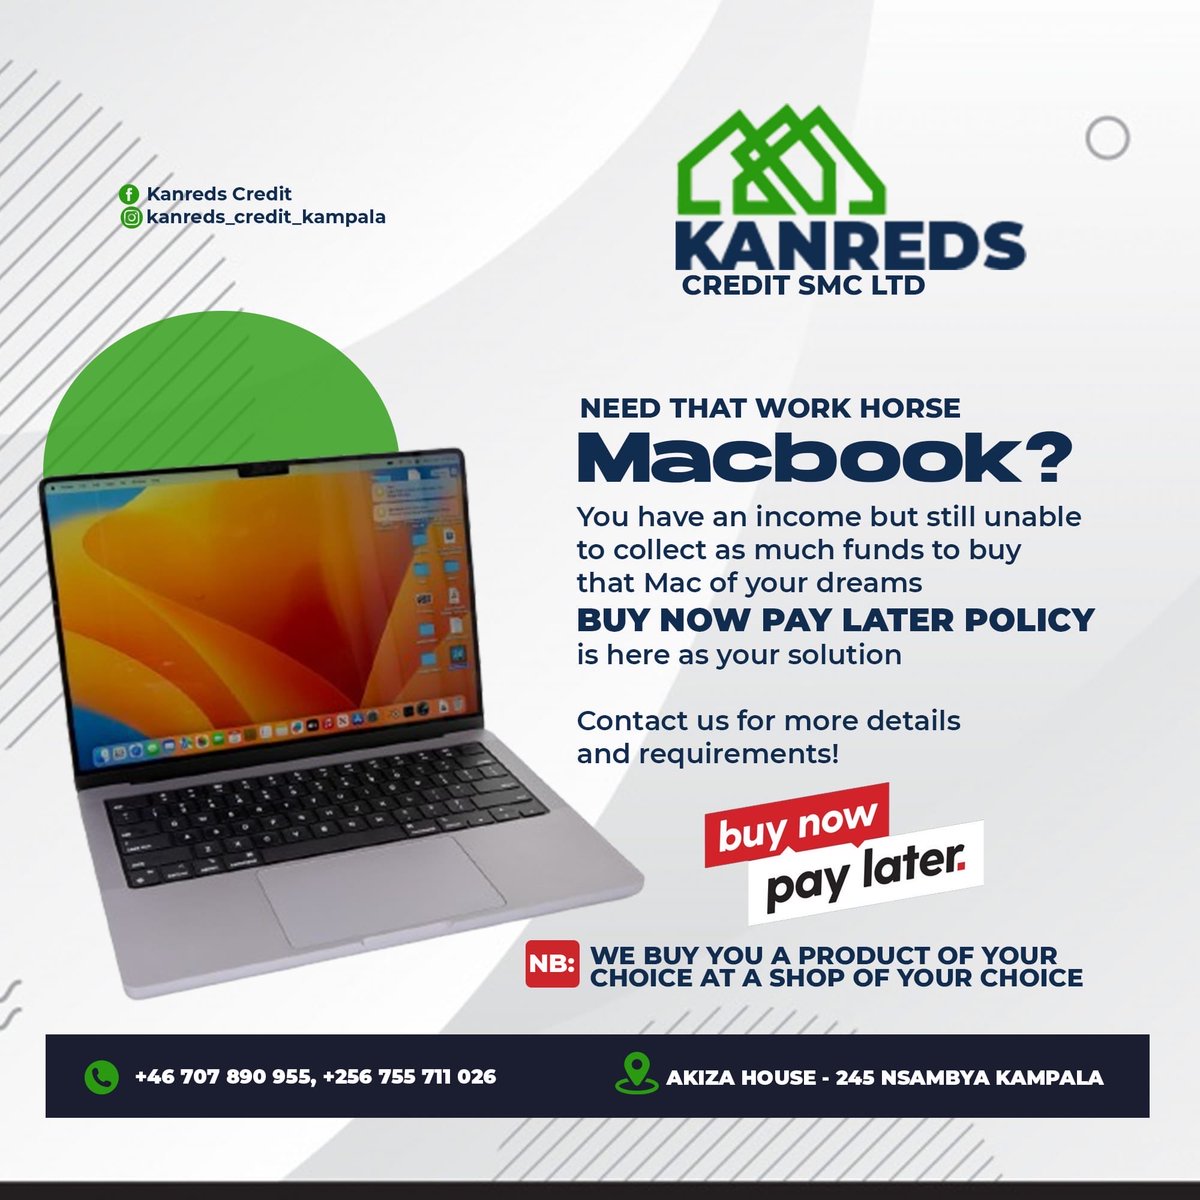 Get your Home theatre and a MacBook and pay later with #KanredsCredit. Here is the chance